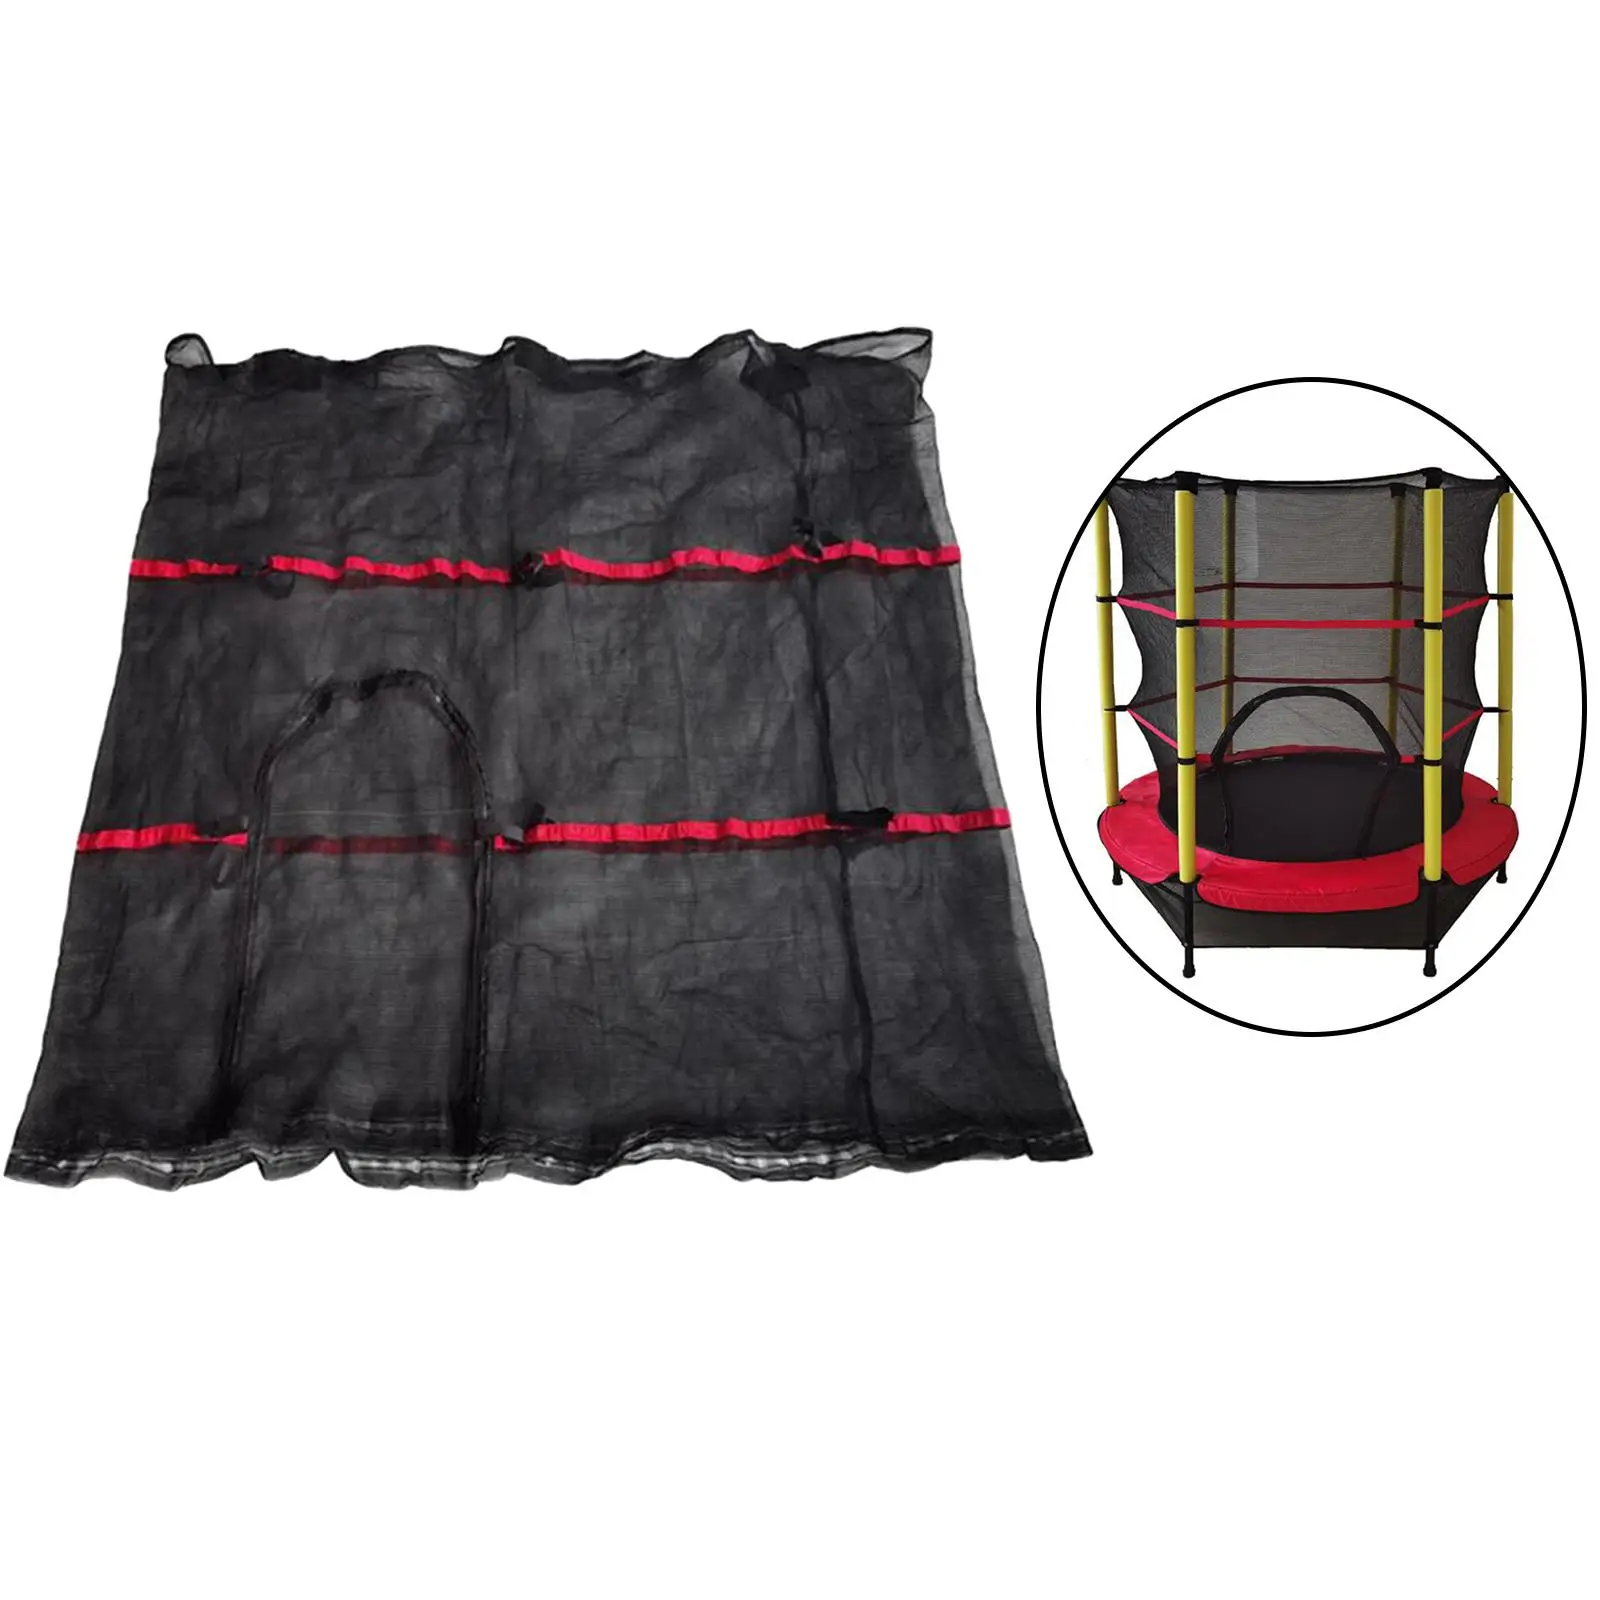 Trampoline Enclosure Net Security Net, 130cm Hight Protection Guard Durable